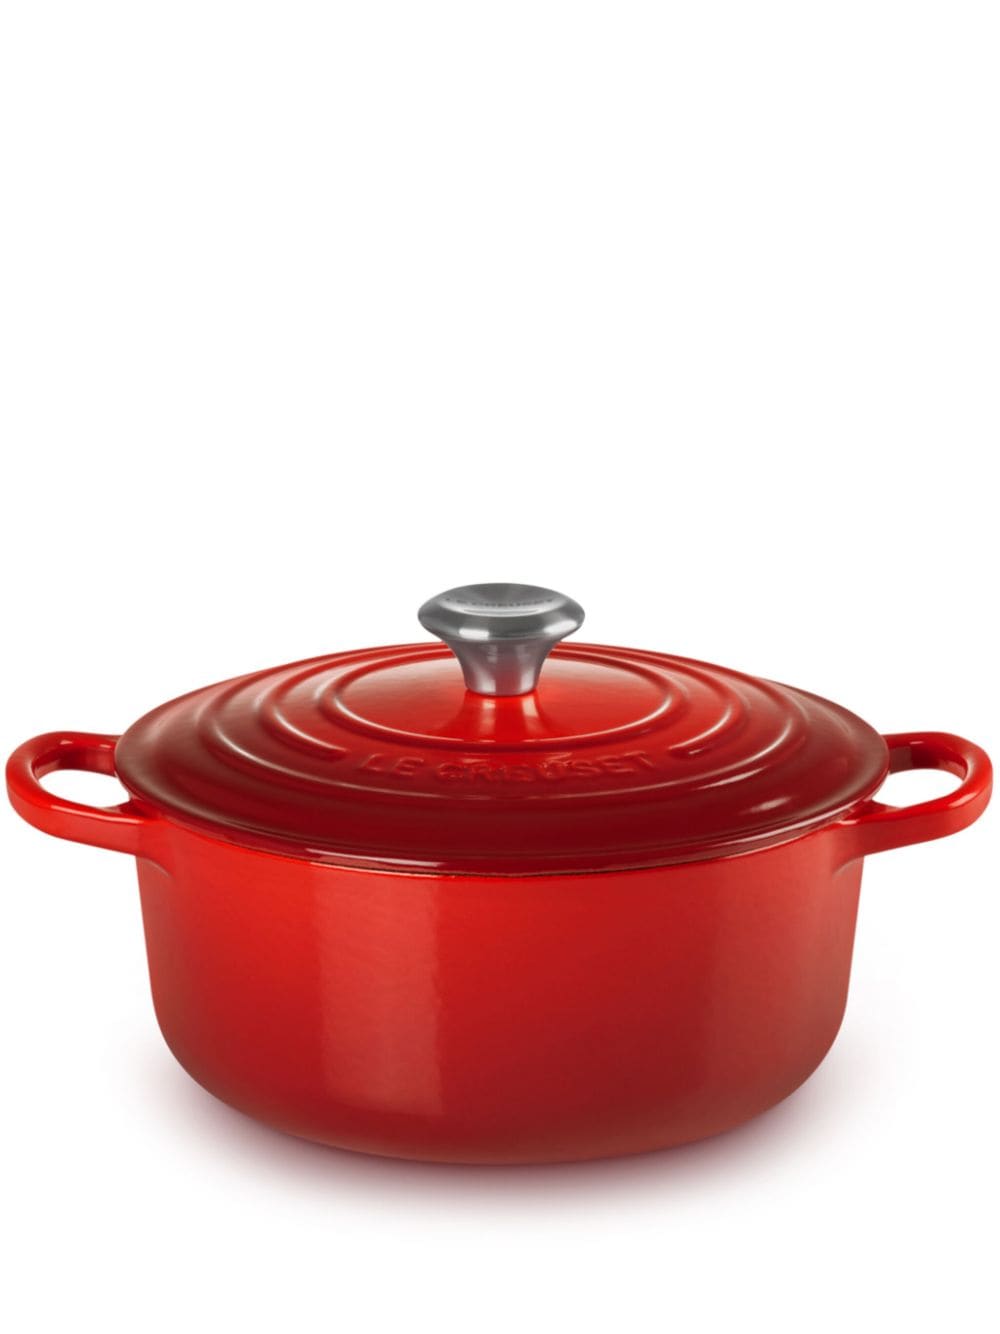 Le Creuset Round Pot 24cm In Red